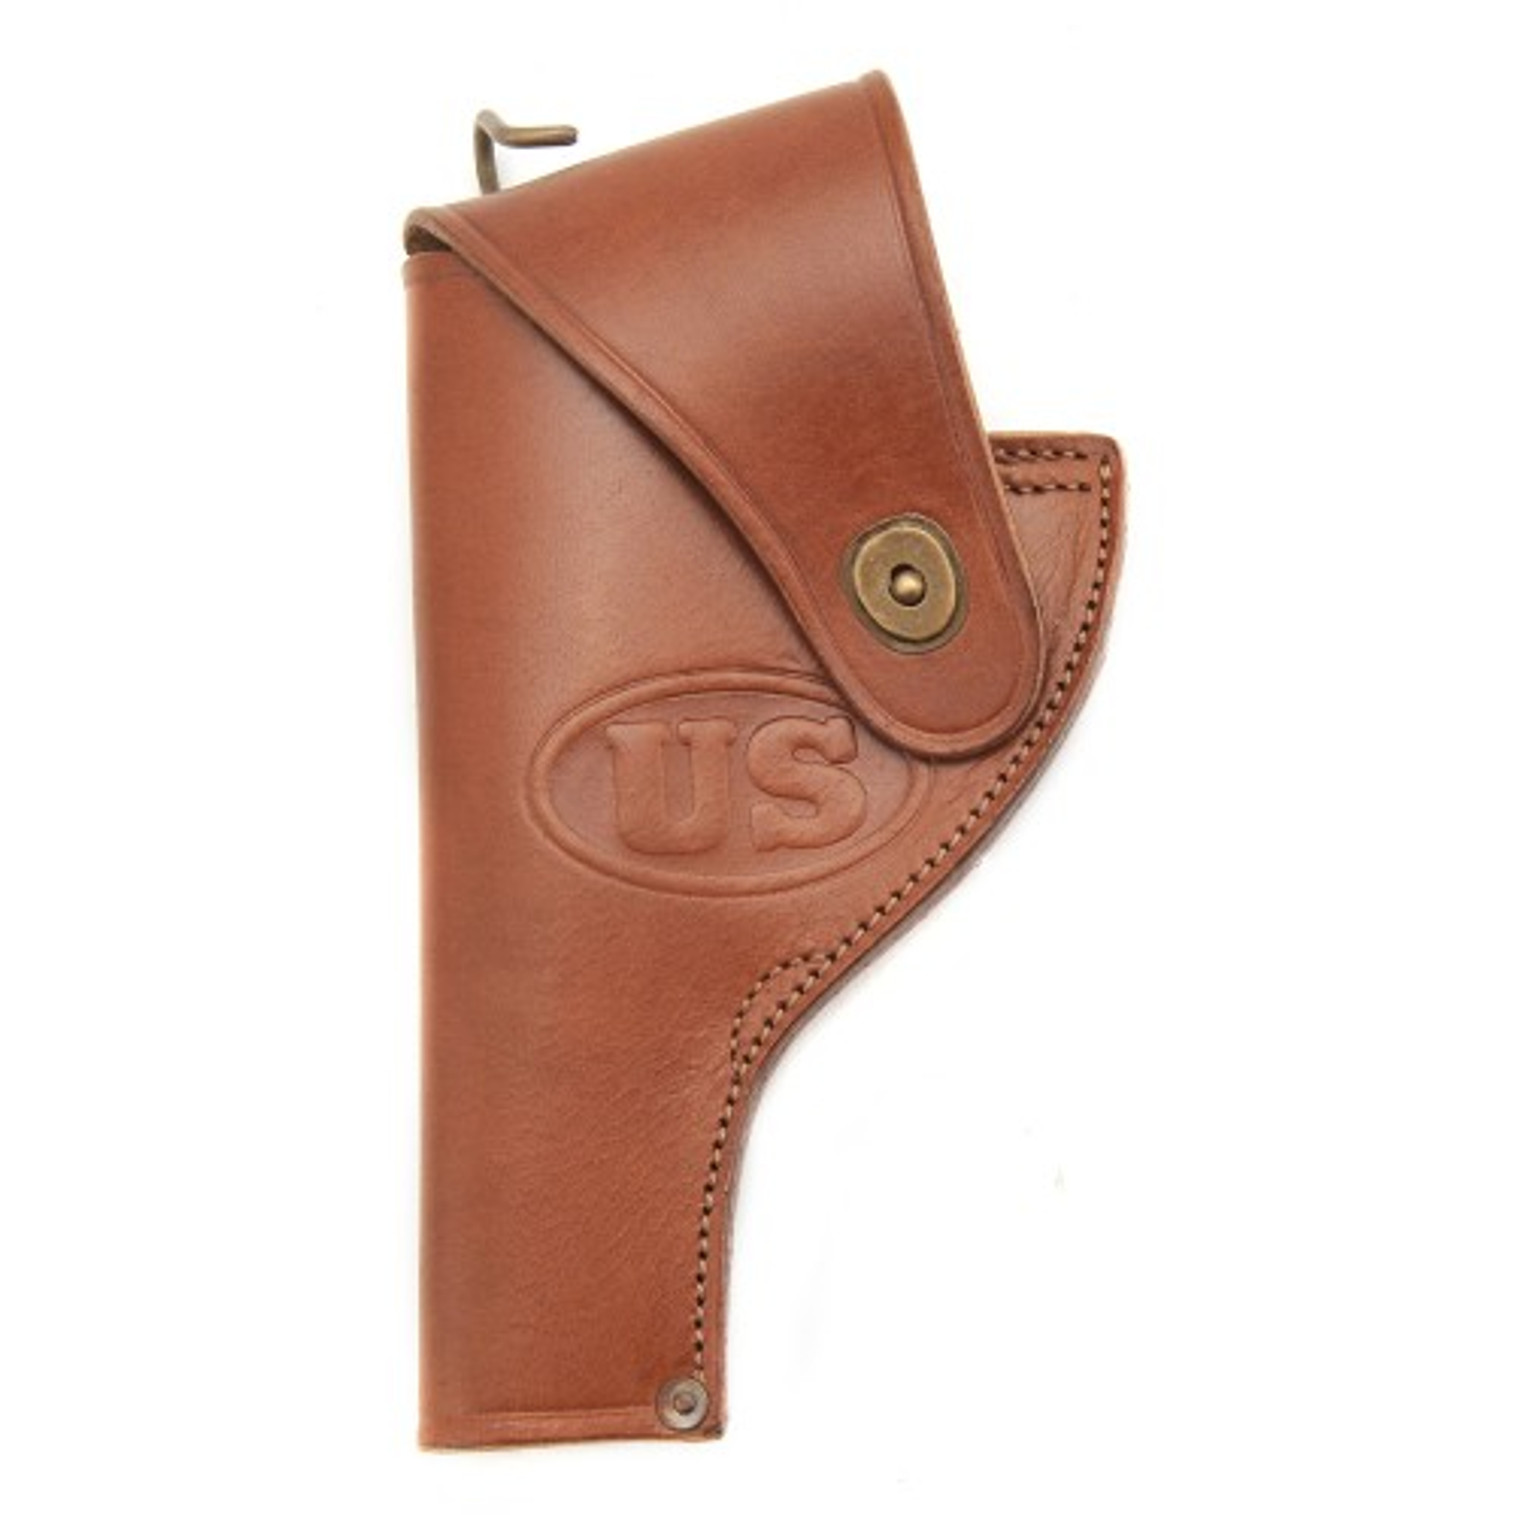 Us Ww2 Smith & Wesson Victory Model Revolver Holster In Brown Leather .38 Special Model 10 Left Hand Version